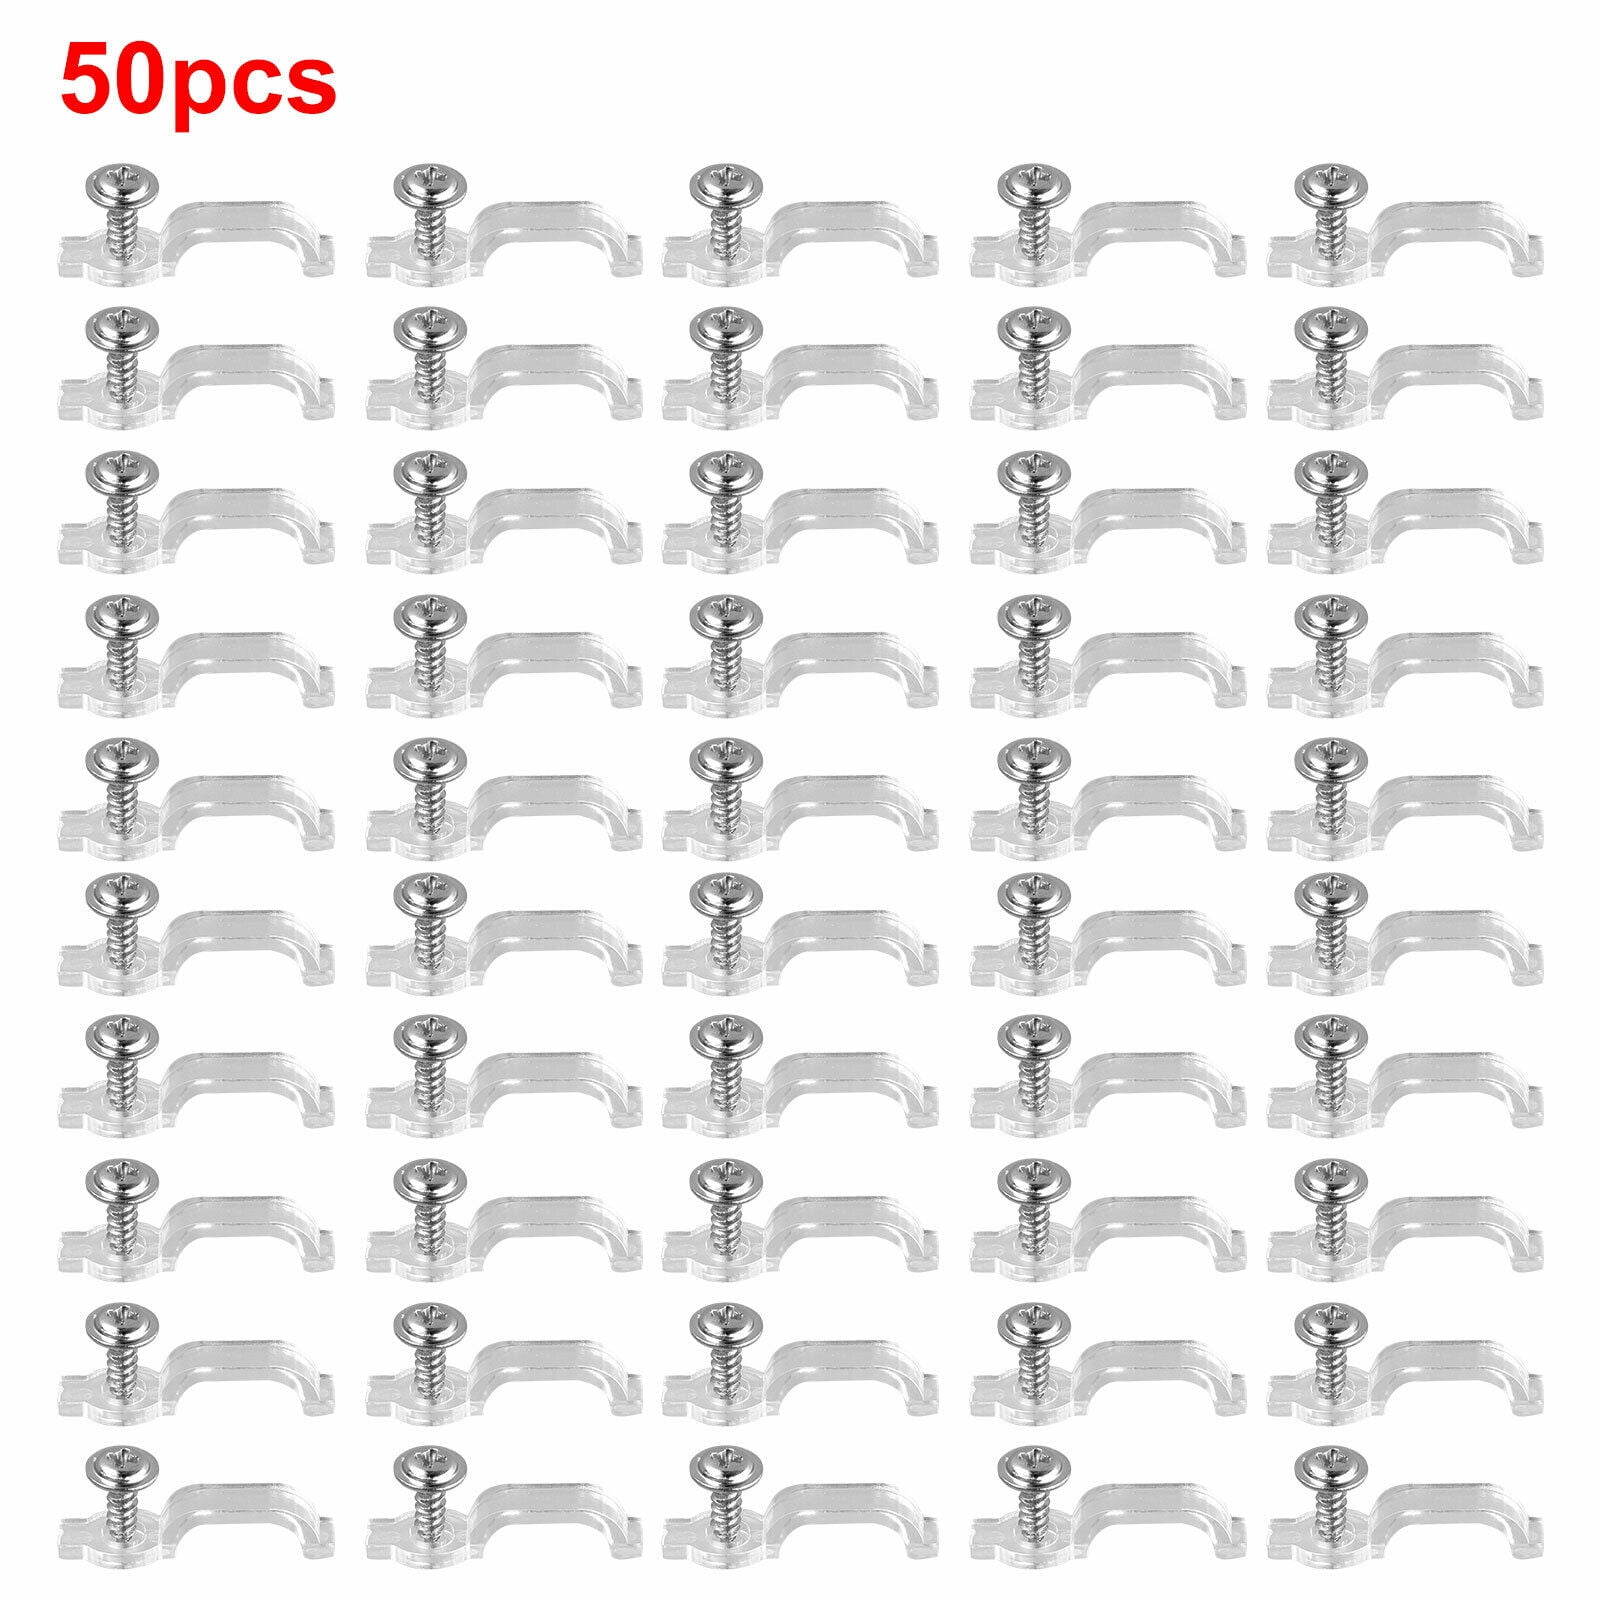 50/100pcs Plastic Fixing Clip Holders Waterproof For 5050 LED Strip Light Clips 